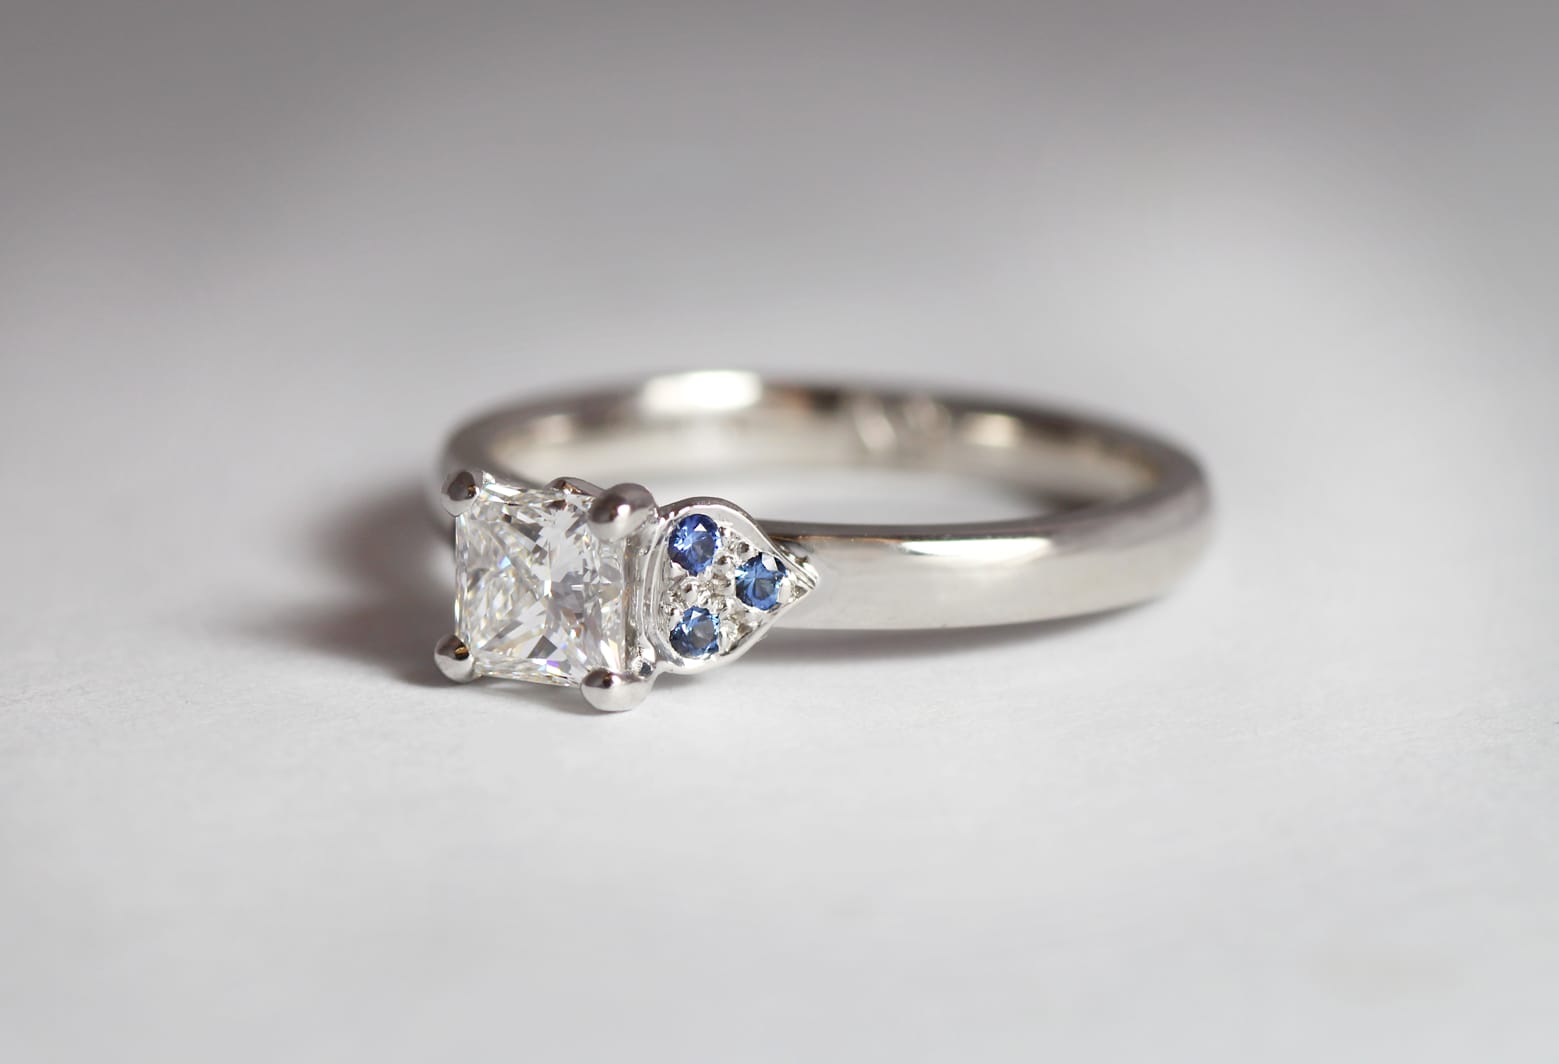 18ct Fairtrade white gold with princess cut diamond and sapphires by Zoe Pook Jewellery